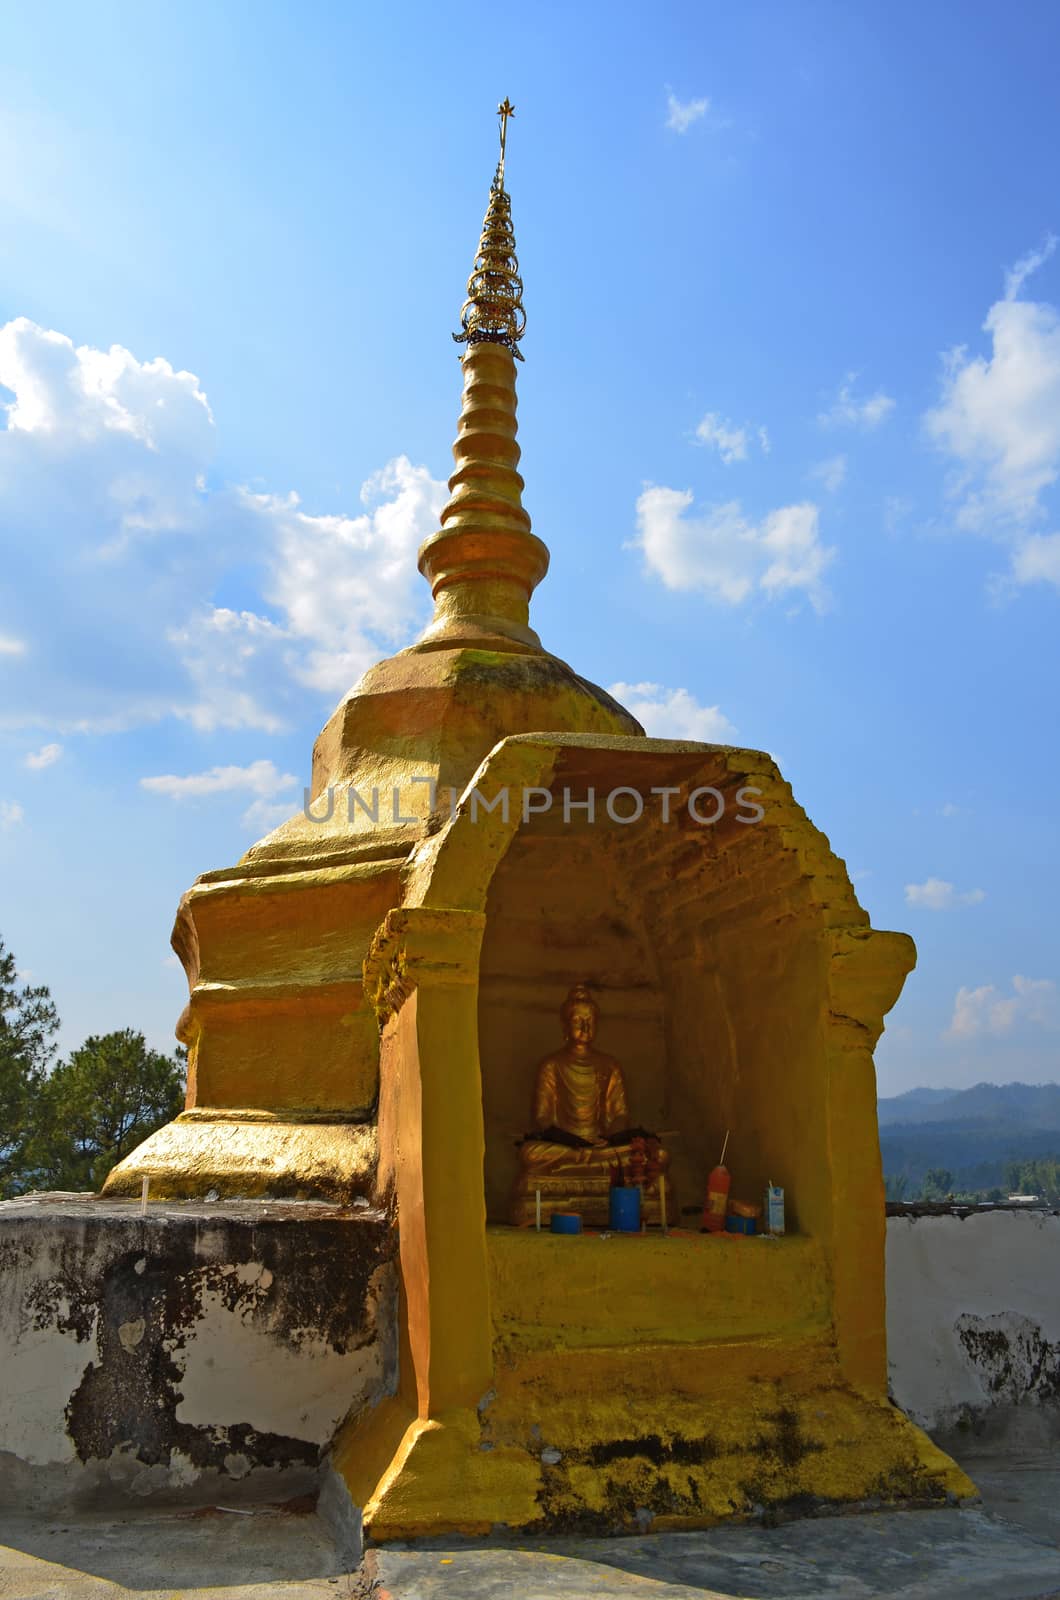 Golden Phra That on Hill above Village Series 1_2, Buddha Image, Cloud and Blue Sky, Chiang Mai province, Thailand